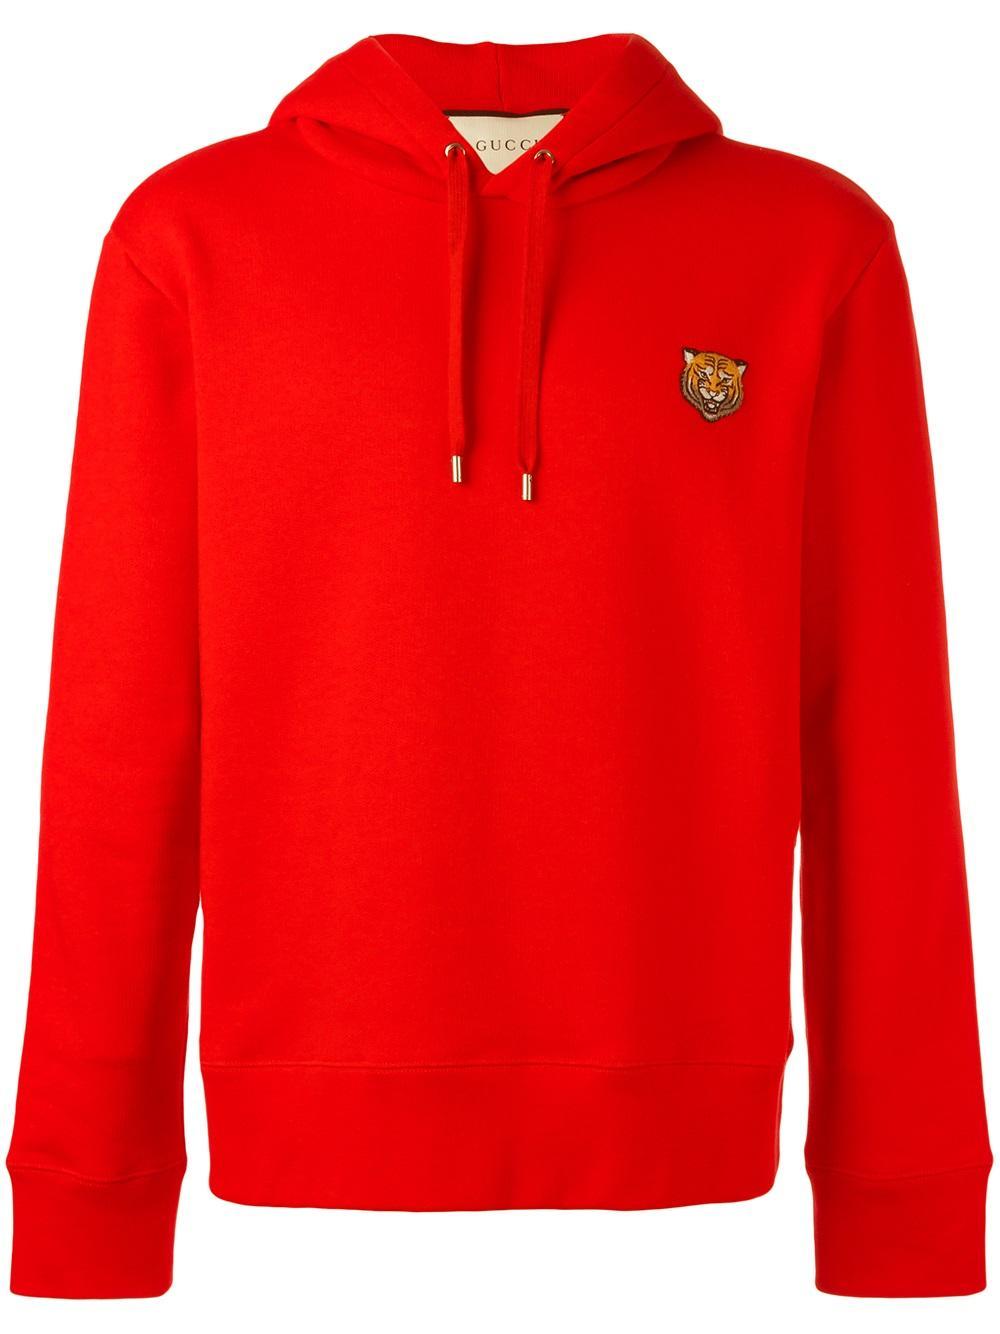 Gucci Cotton Tiger Applique Hoodie in Red for Men - Lyst